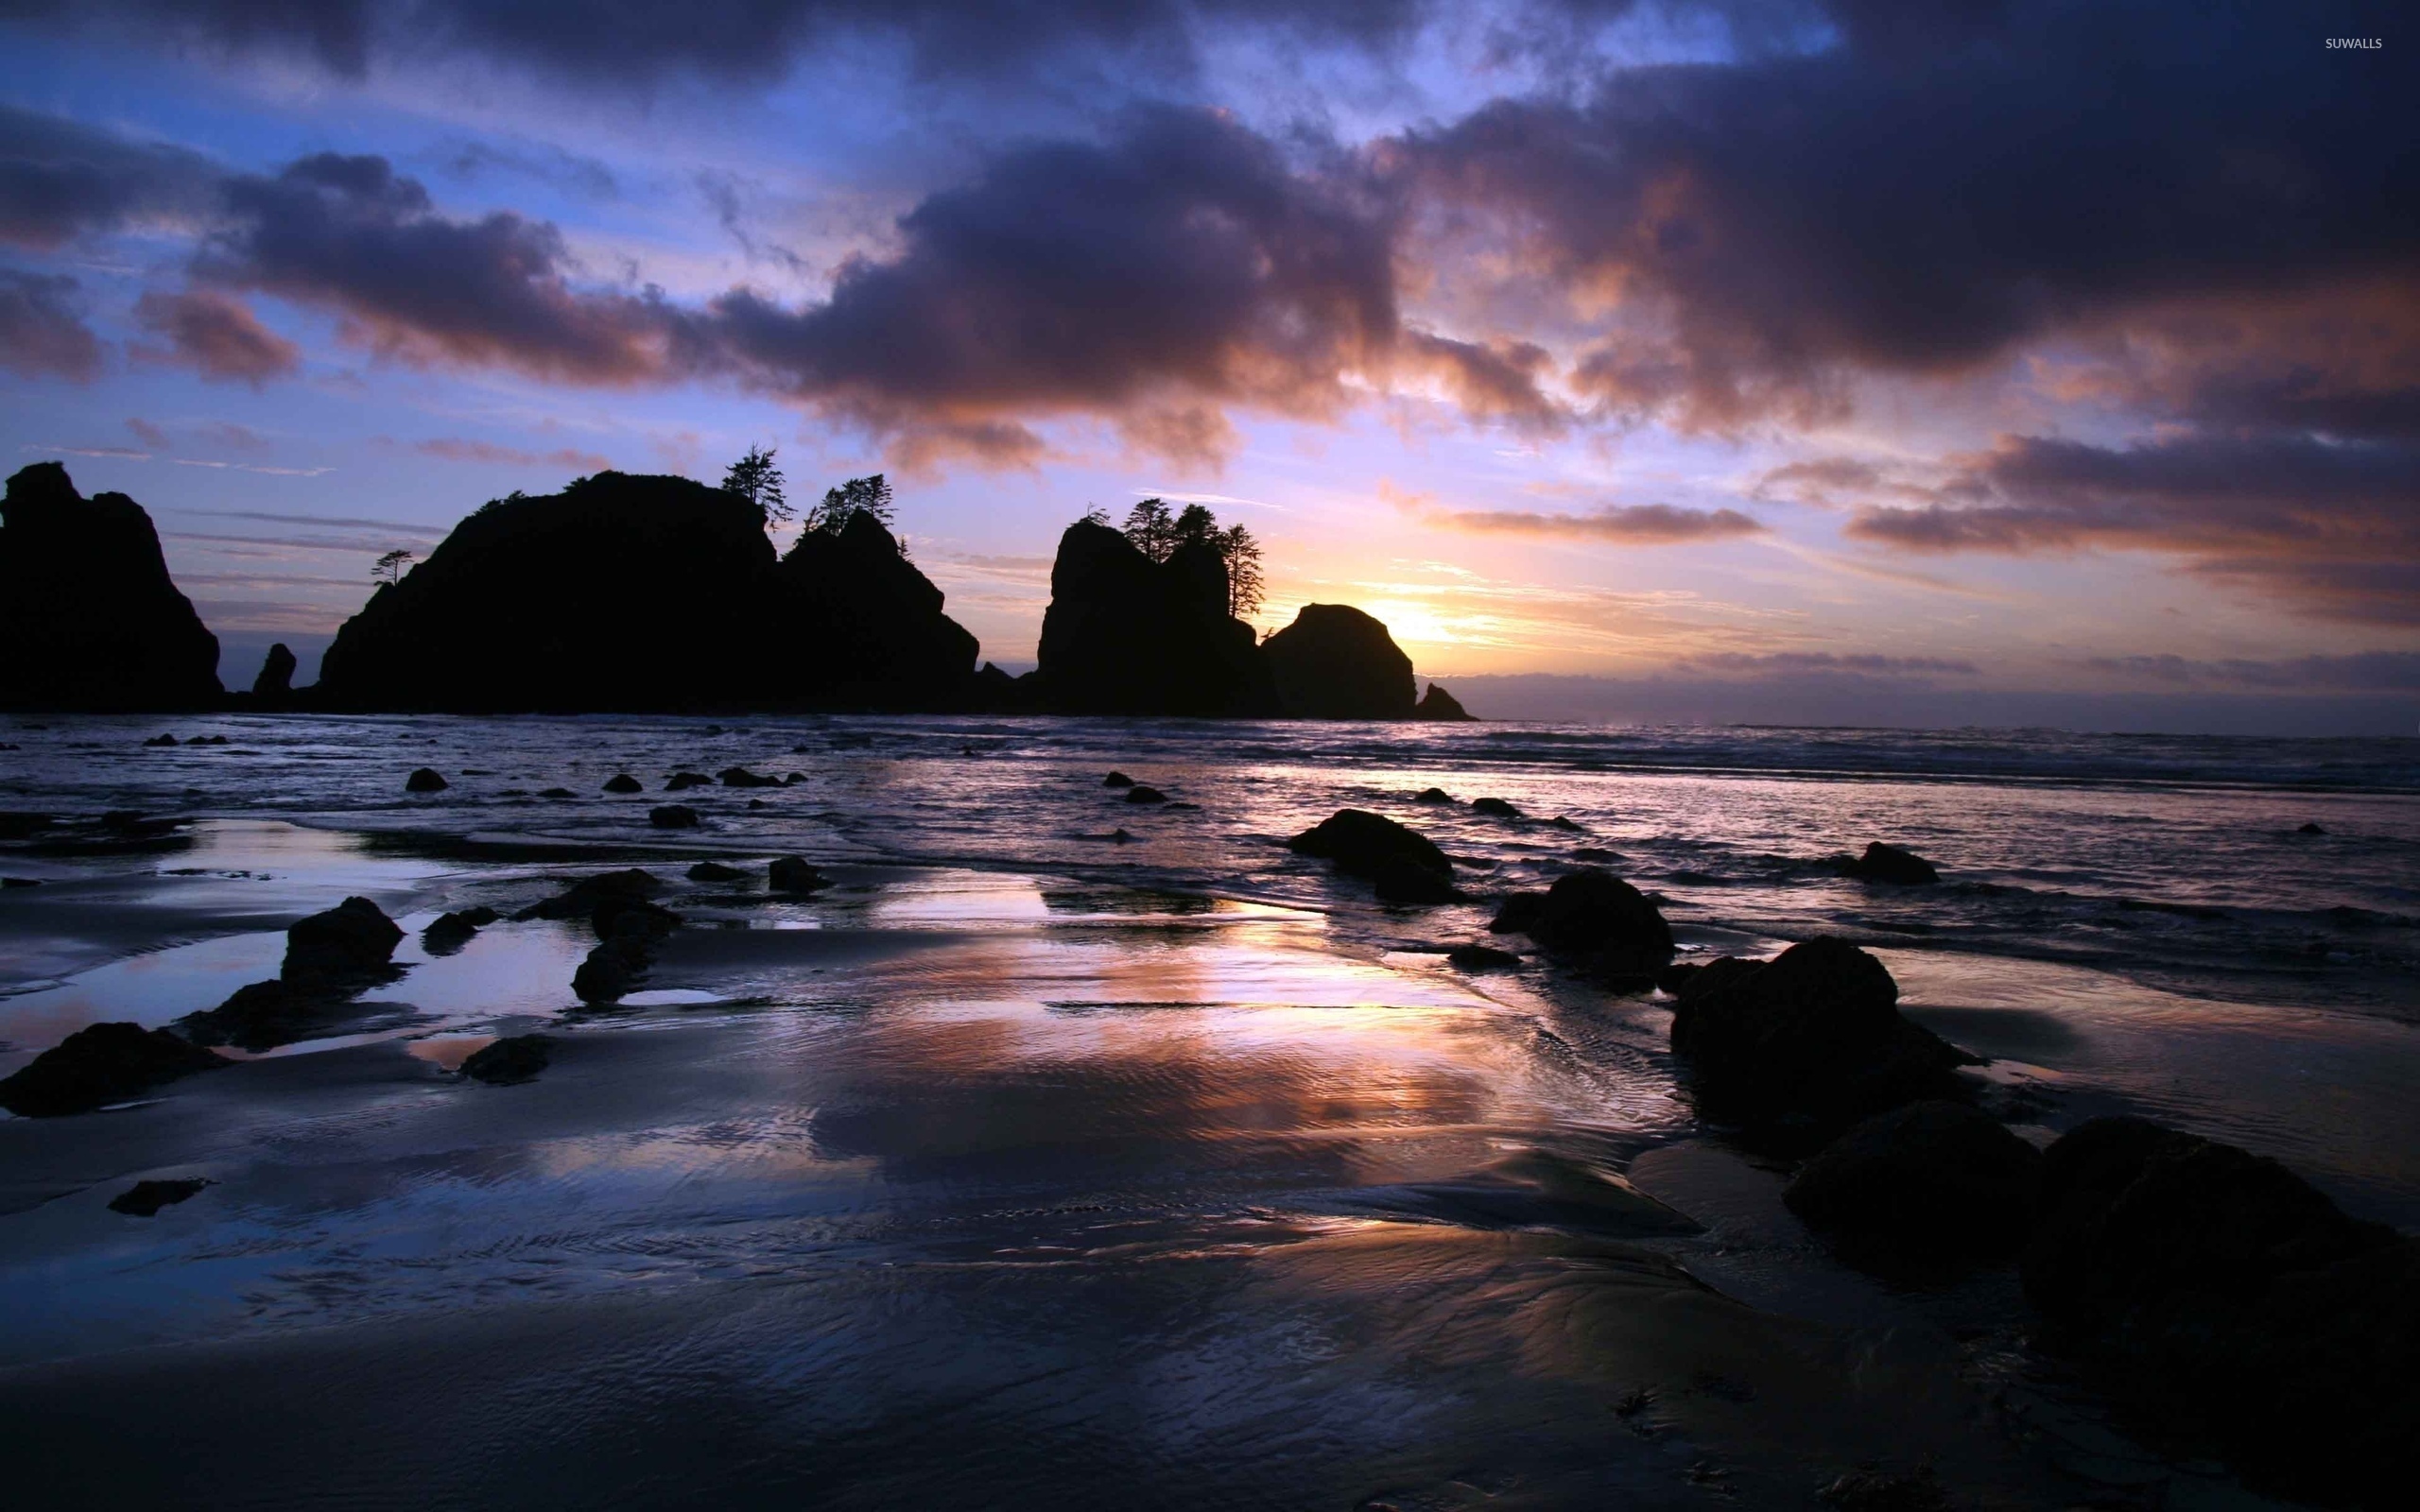 Olympic National Park Wallpapers